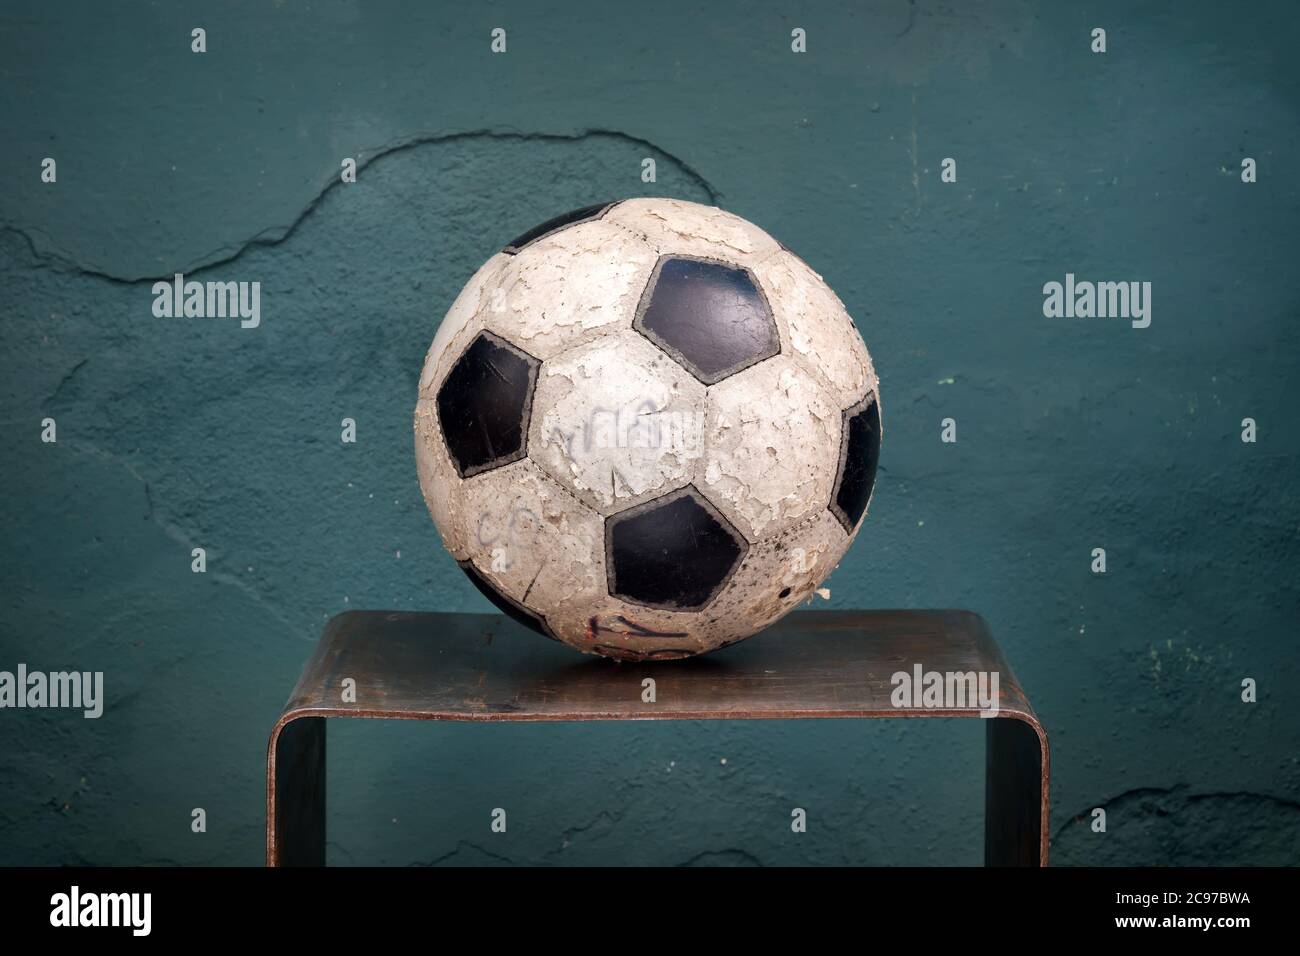 Old stained football or soccer ball on a small shelf against an old rustic green wall with missing plaster and copyspace Stock Photo